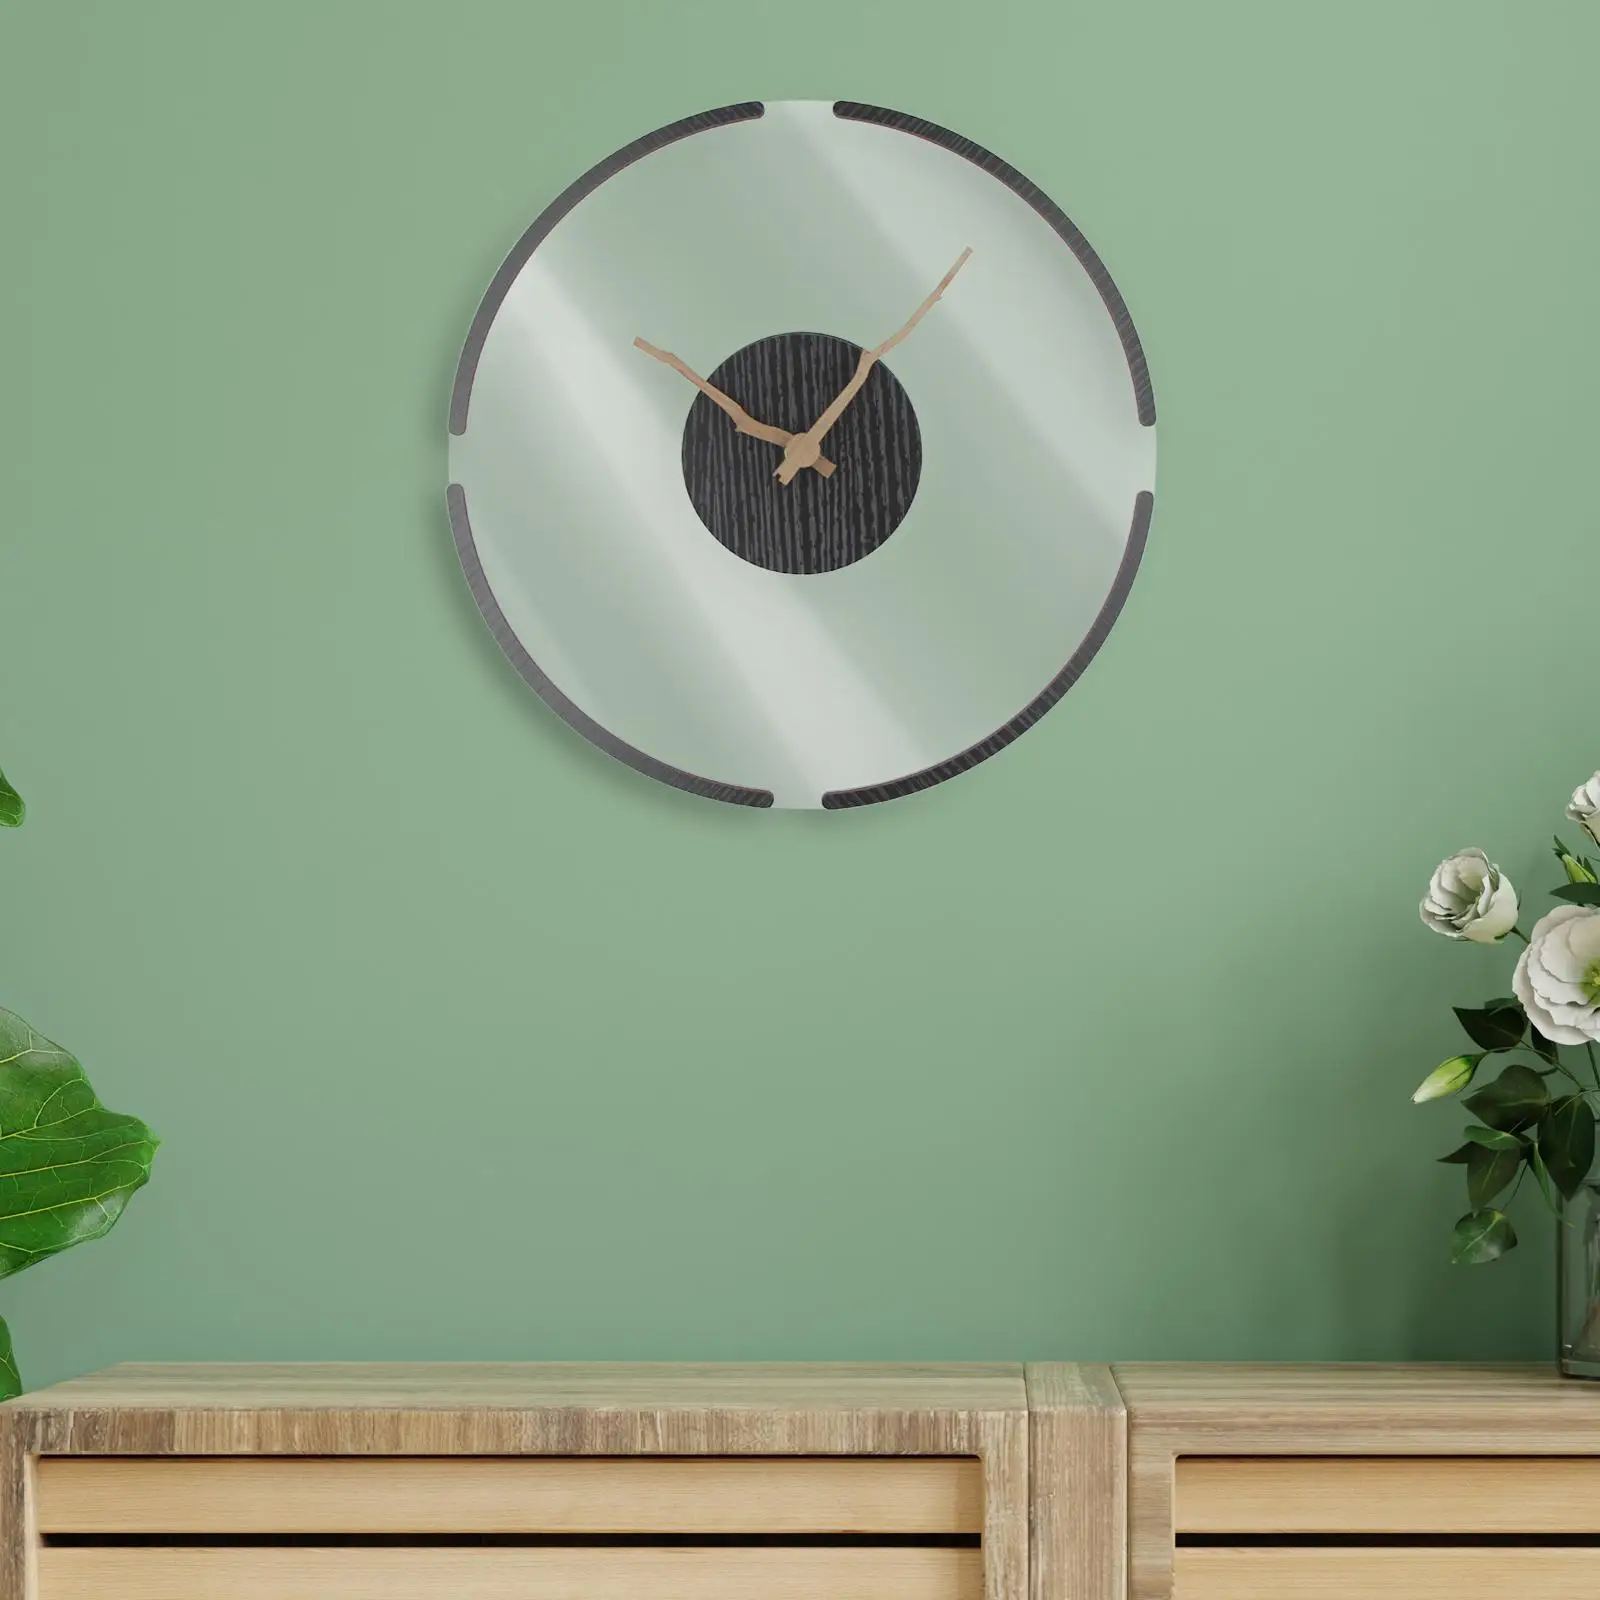 Nordic Style Round Wall Clock 12inch Quiet Large Modern Simple for Bedroom Living Room Hotel Office Decoration